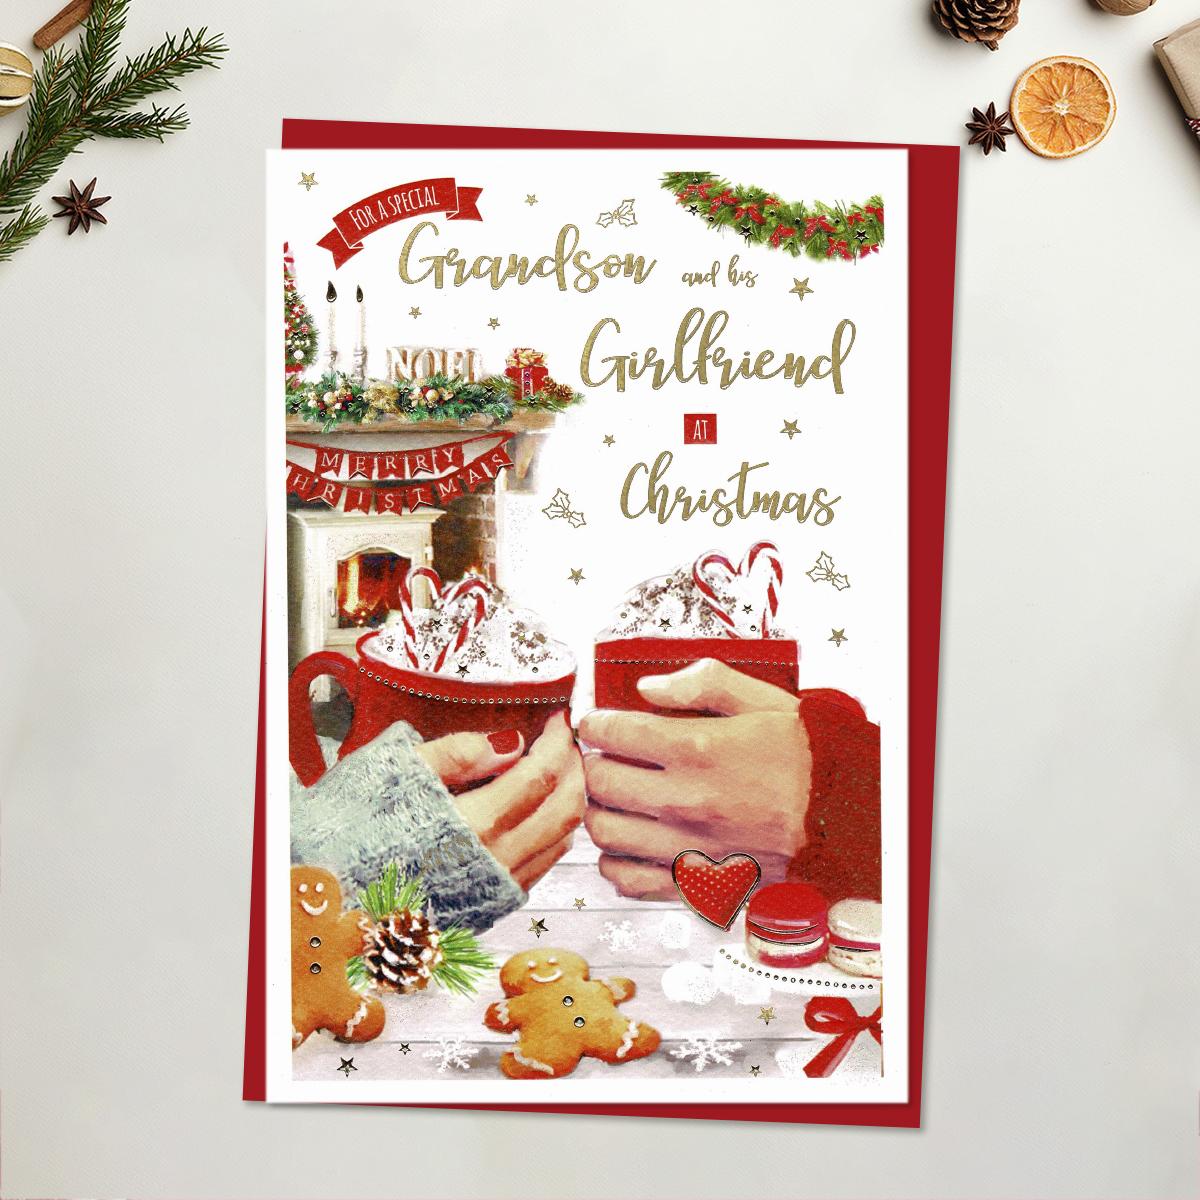 Grandson & Girlfriend Christmas Hot Chocolate Card Front Image